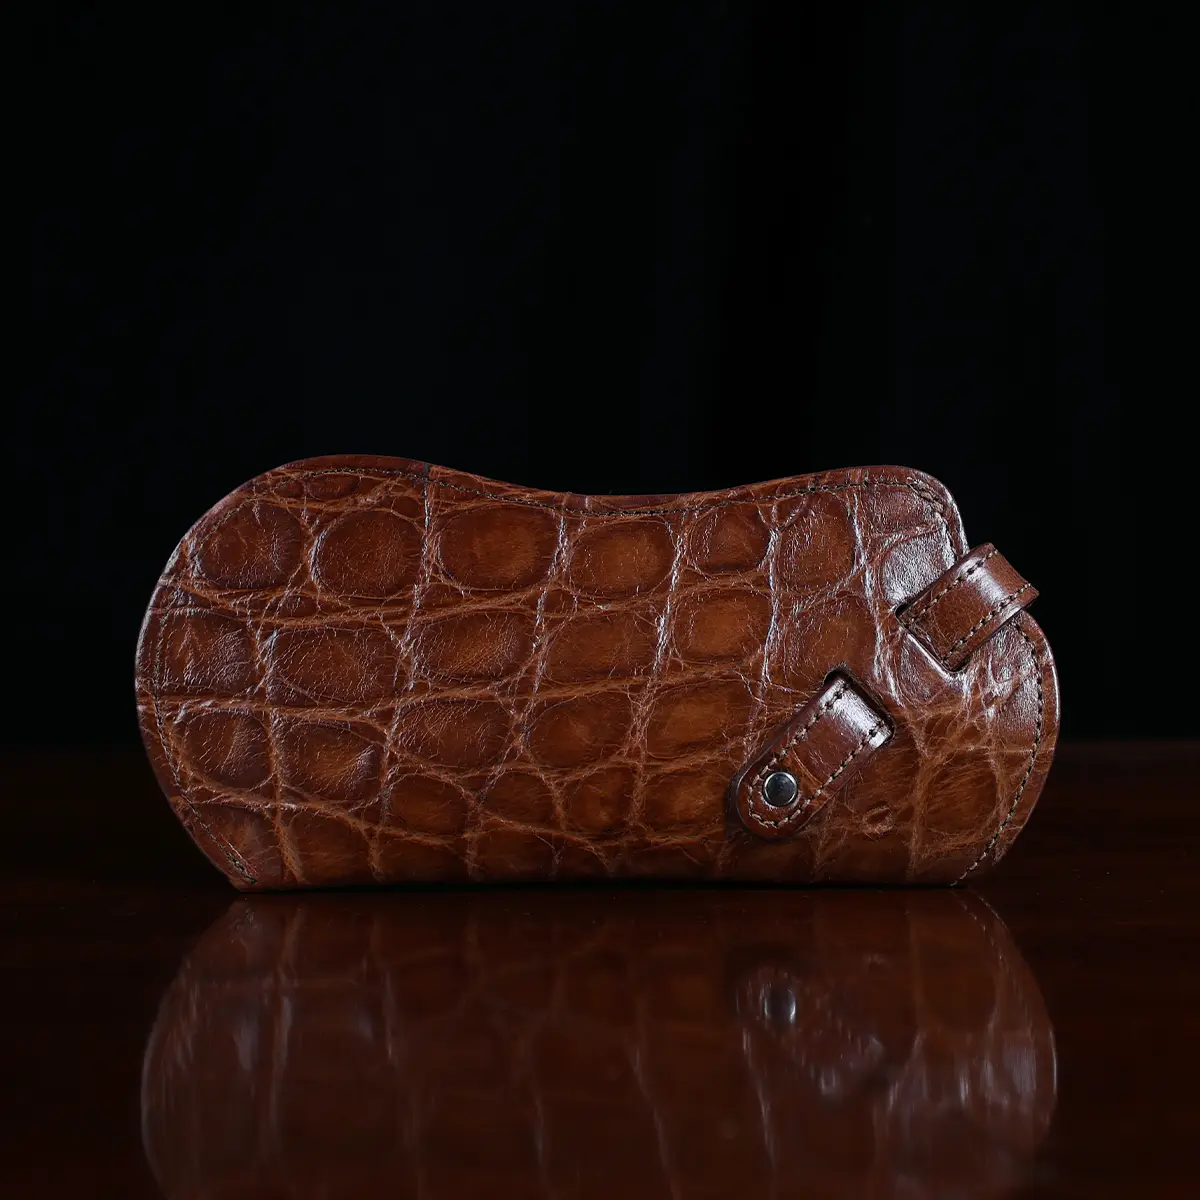 No. 2 Eyecase Glasses Case in Brown American Alligator with glasses- ID 001 - back view on black background